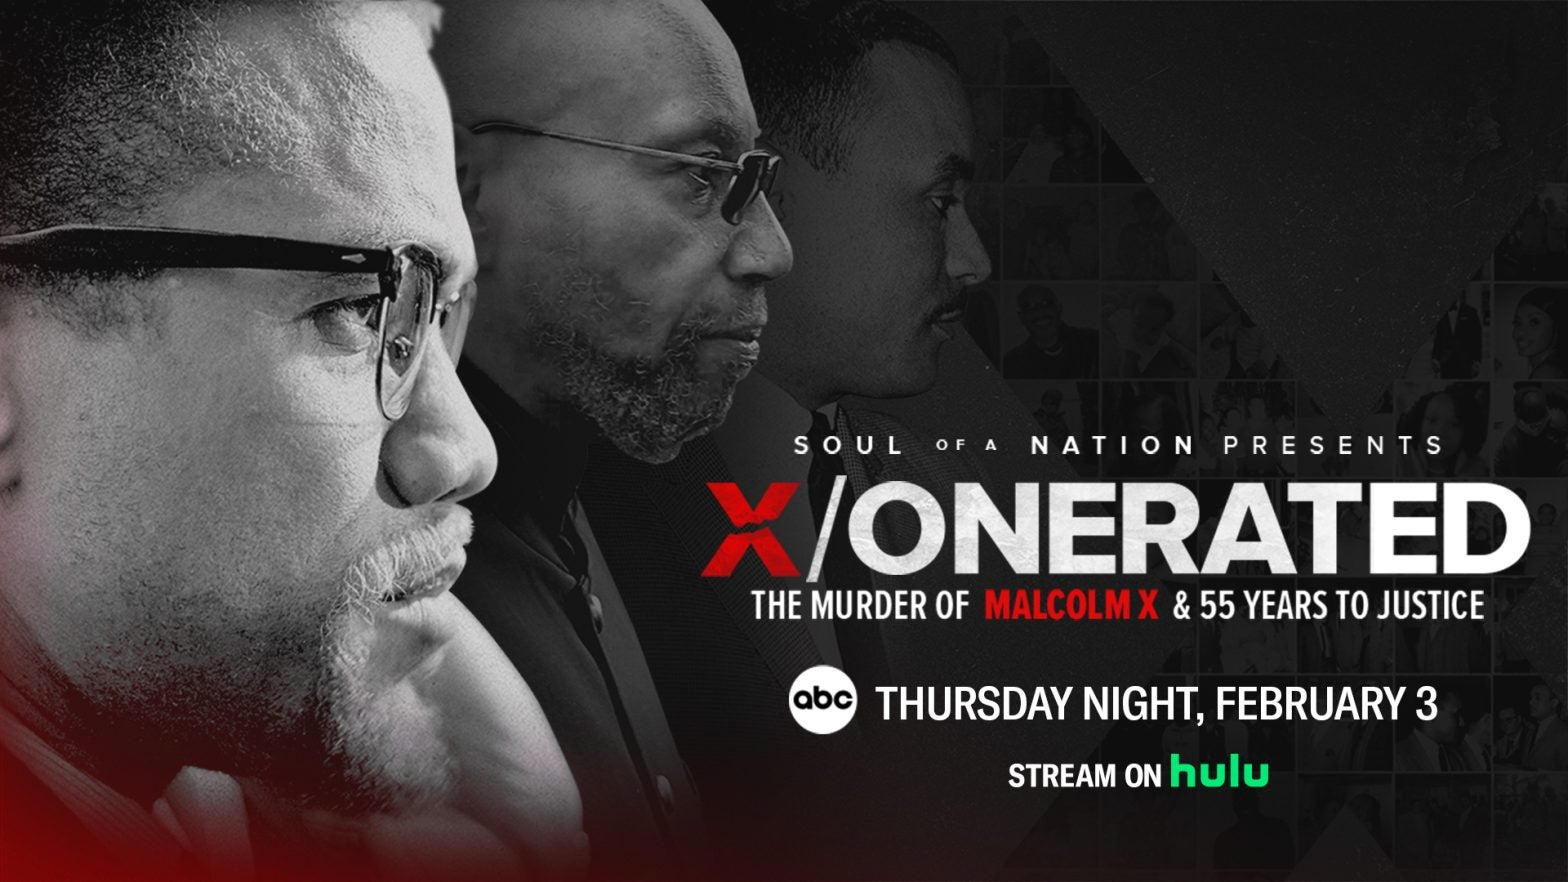 A Man Wrongfully Convicted Of Killing Malcolm X Will Give His First TV Interview In ABC News Special, "X/onerated"